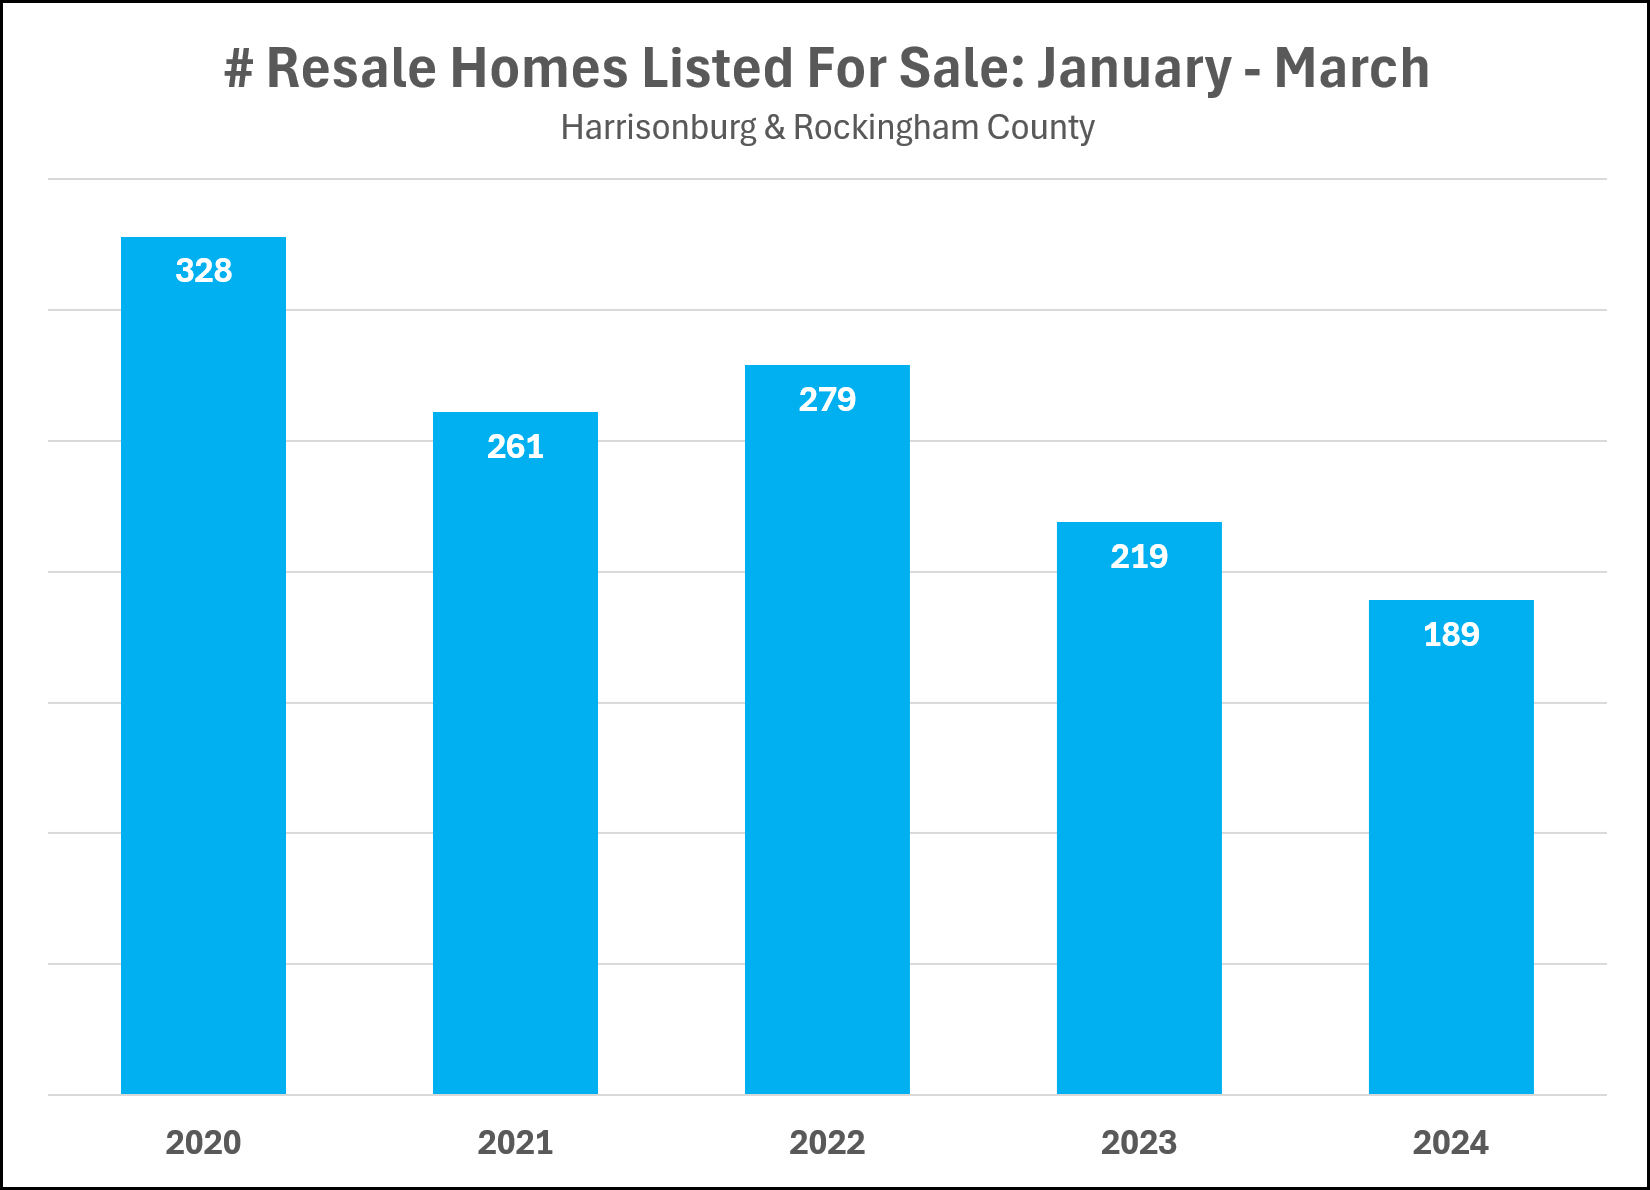 New Listings of Resale Homes